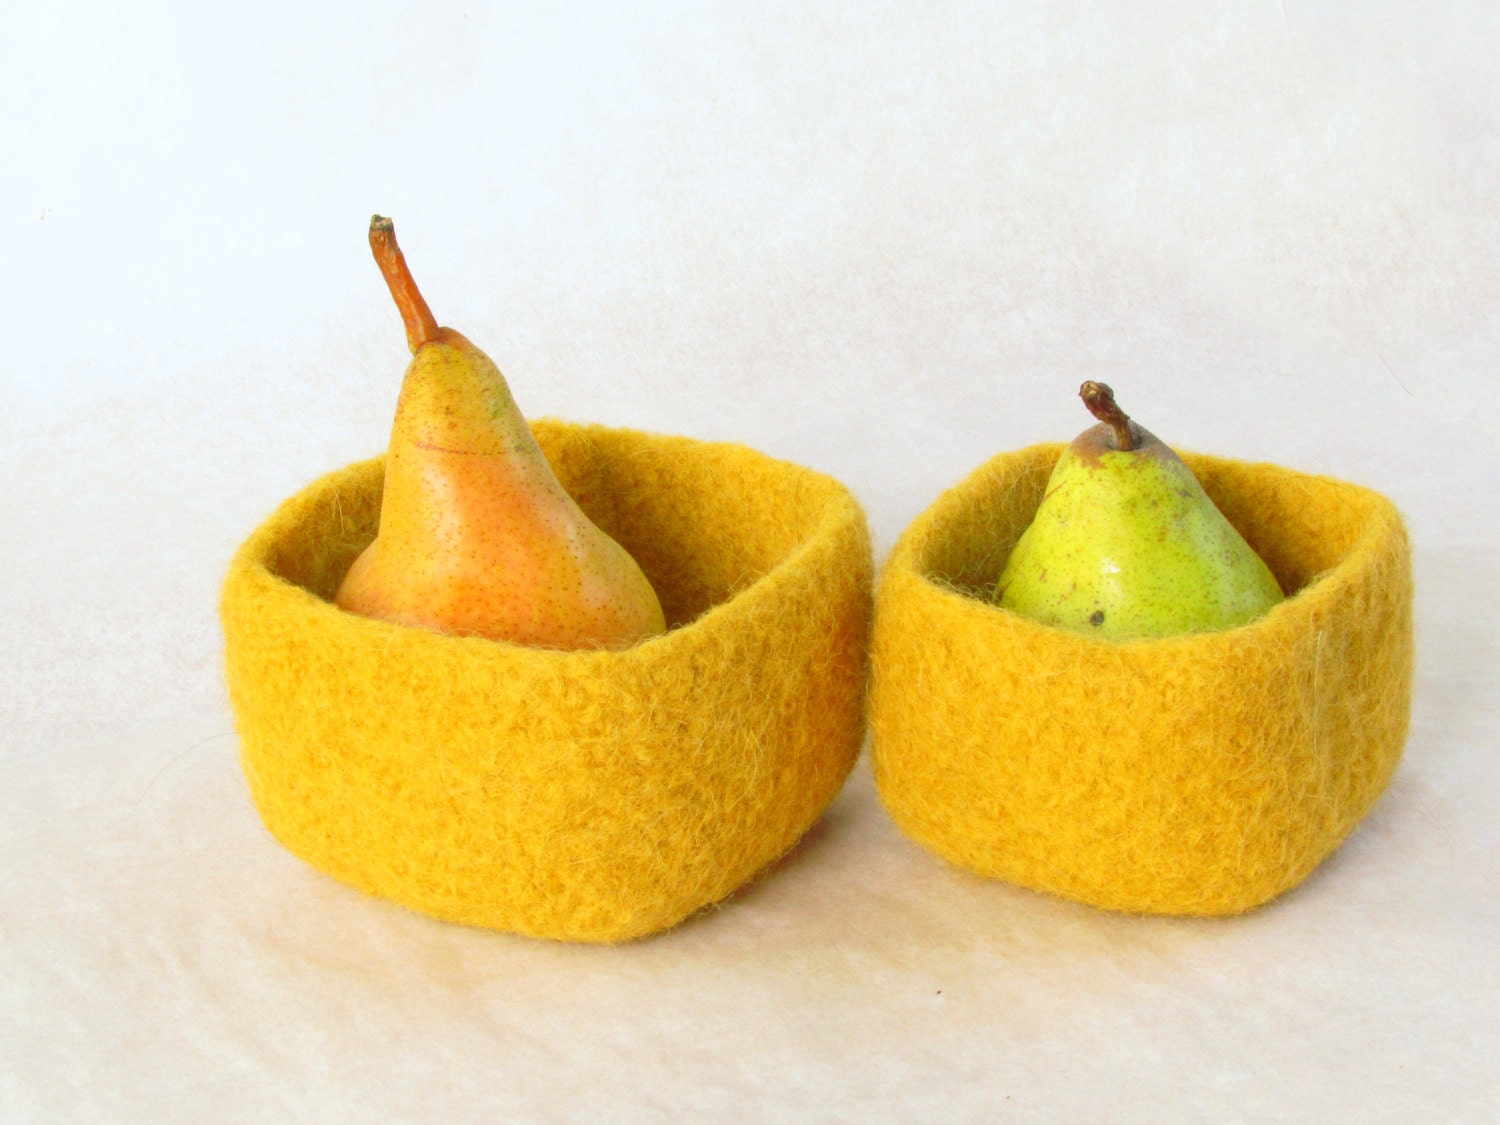 Square felted bowl Mustard yellow  - Cozy little storage - block color nesting wool bowls set of two - ring holder